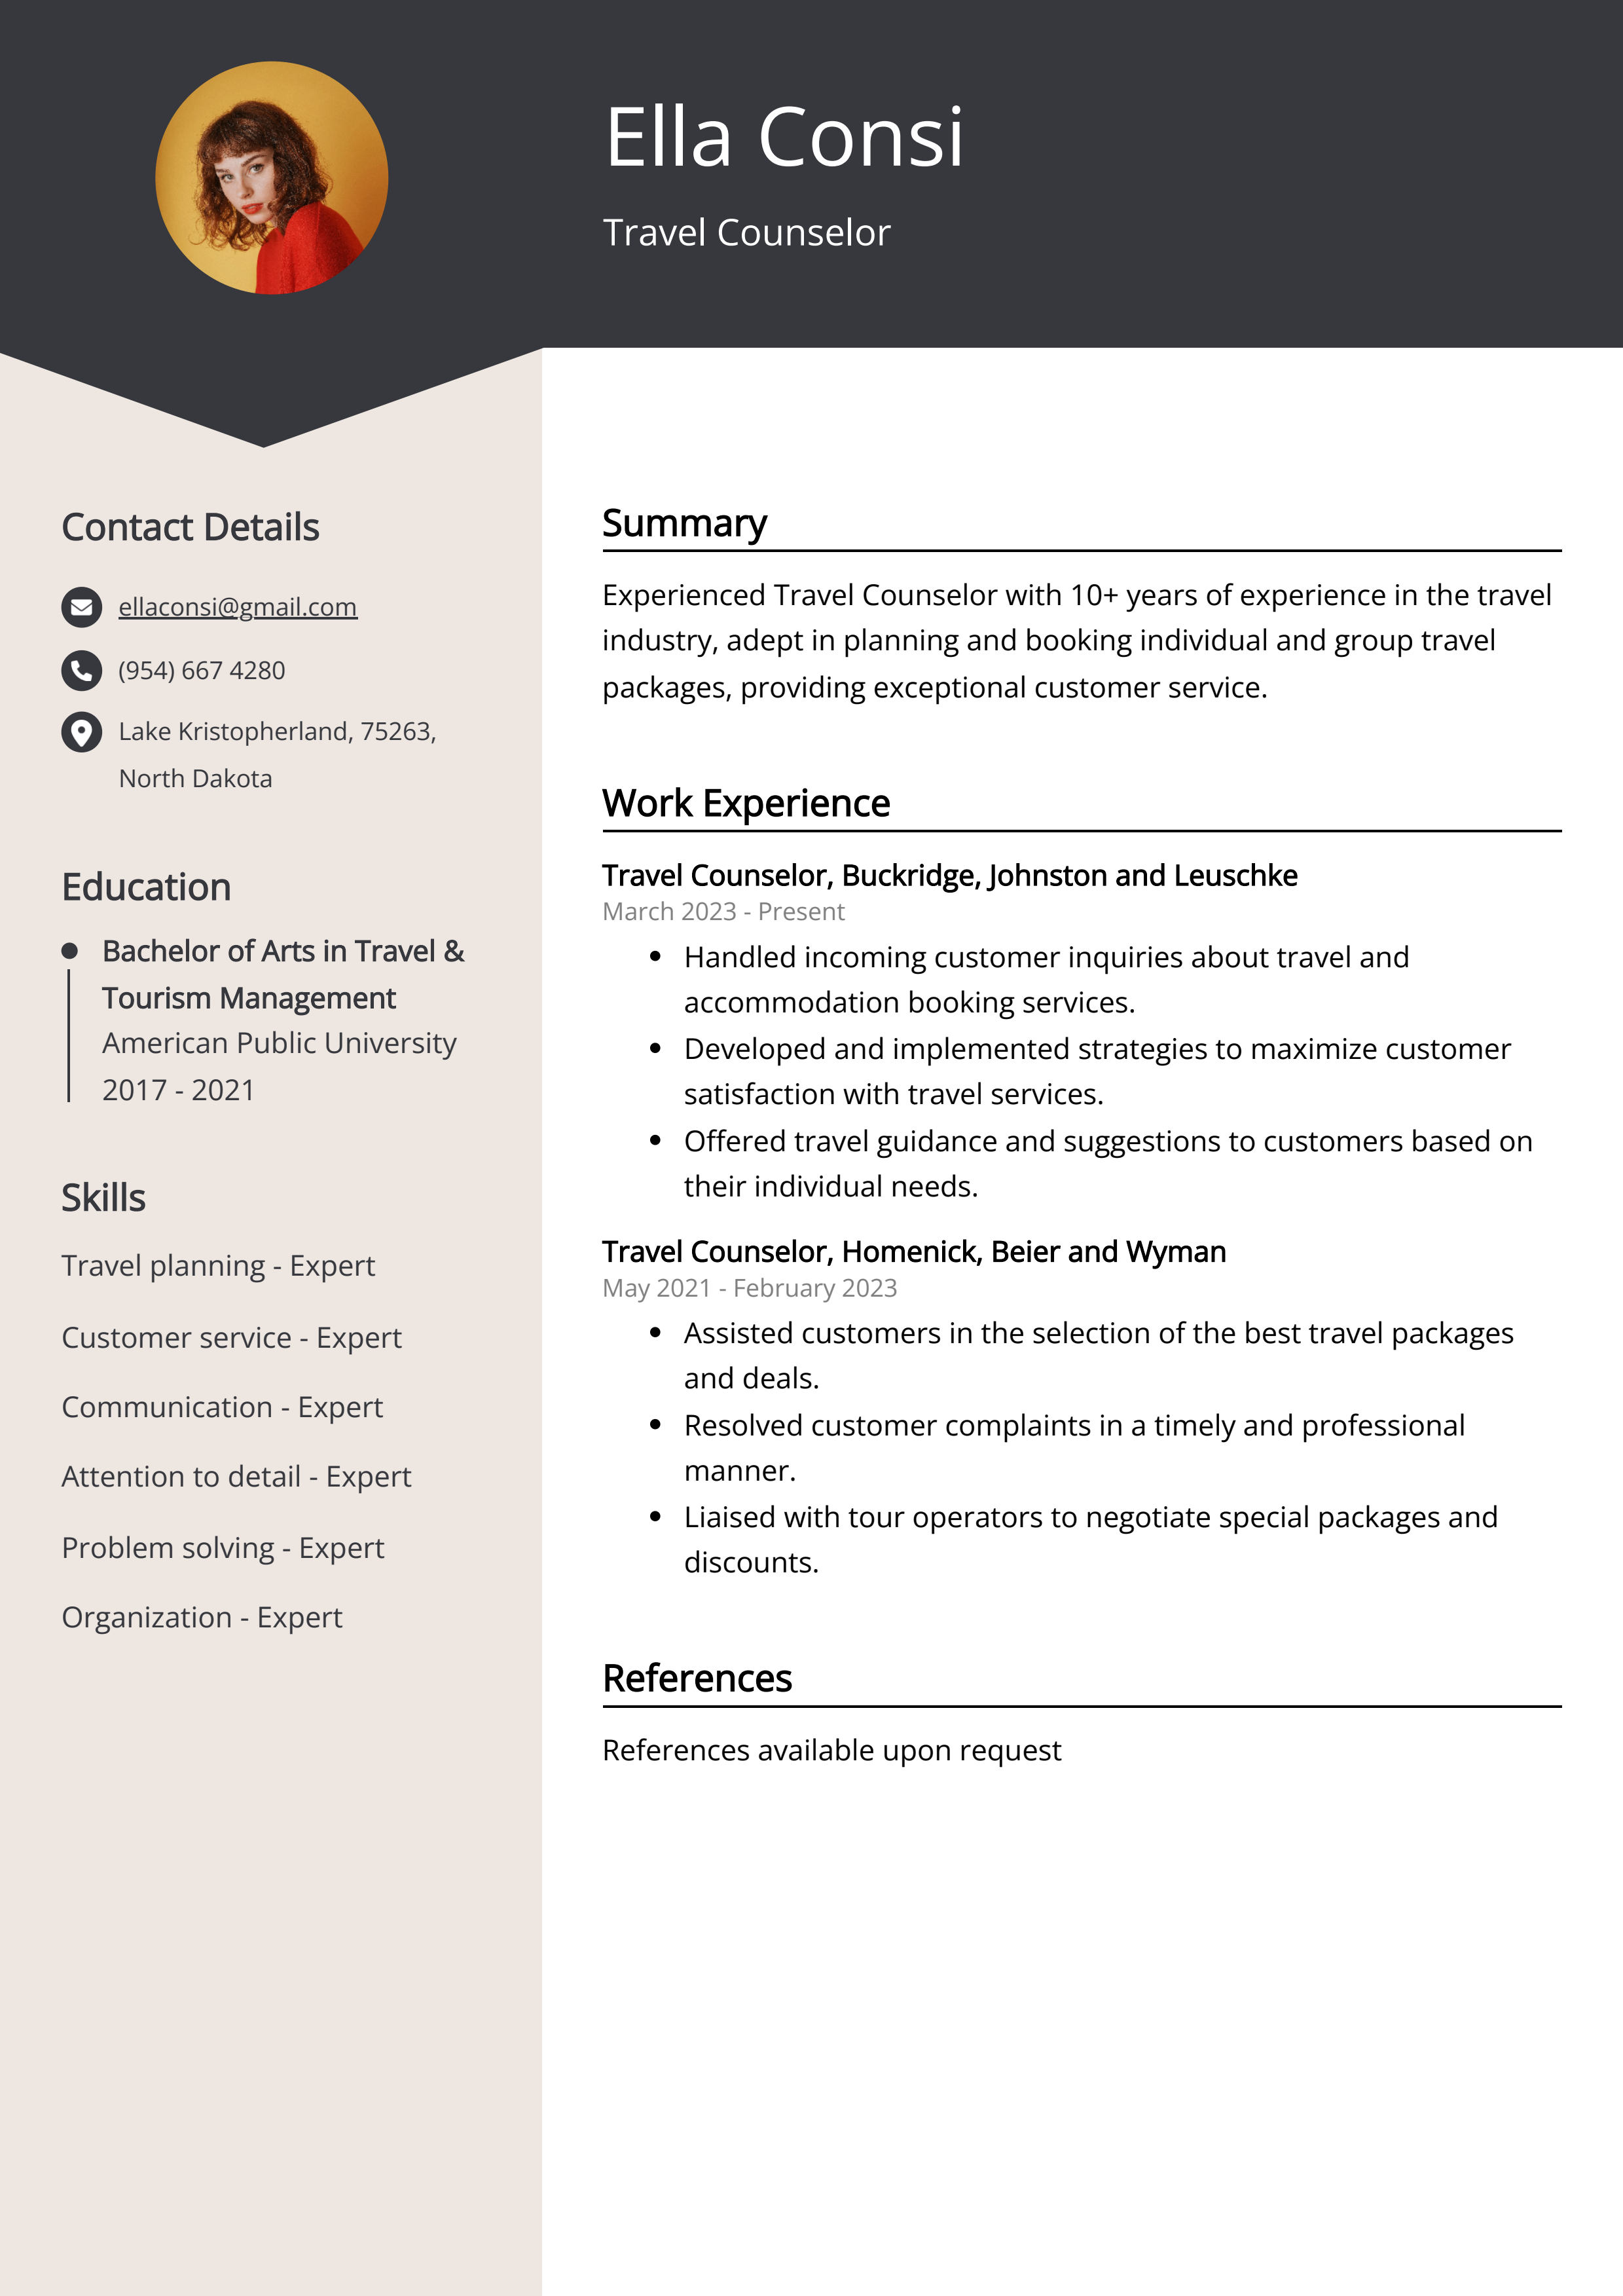 Travel Counselor CV Example